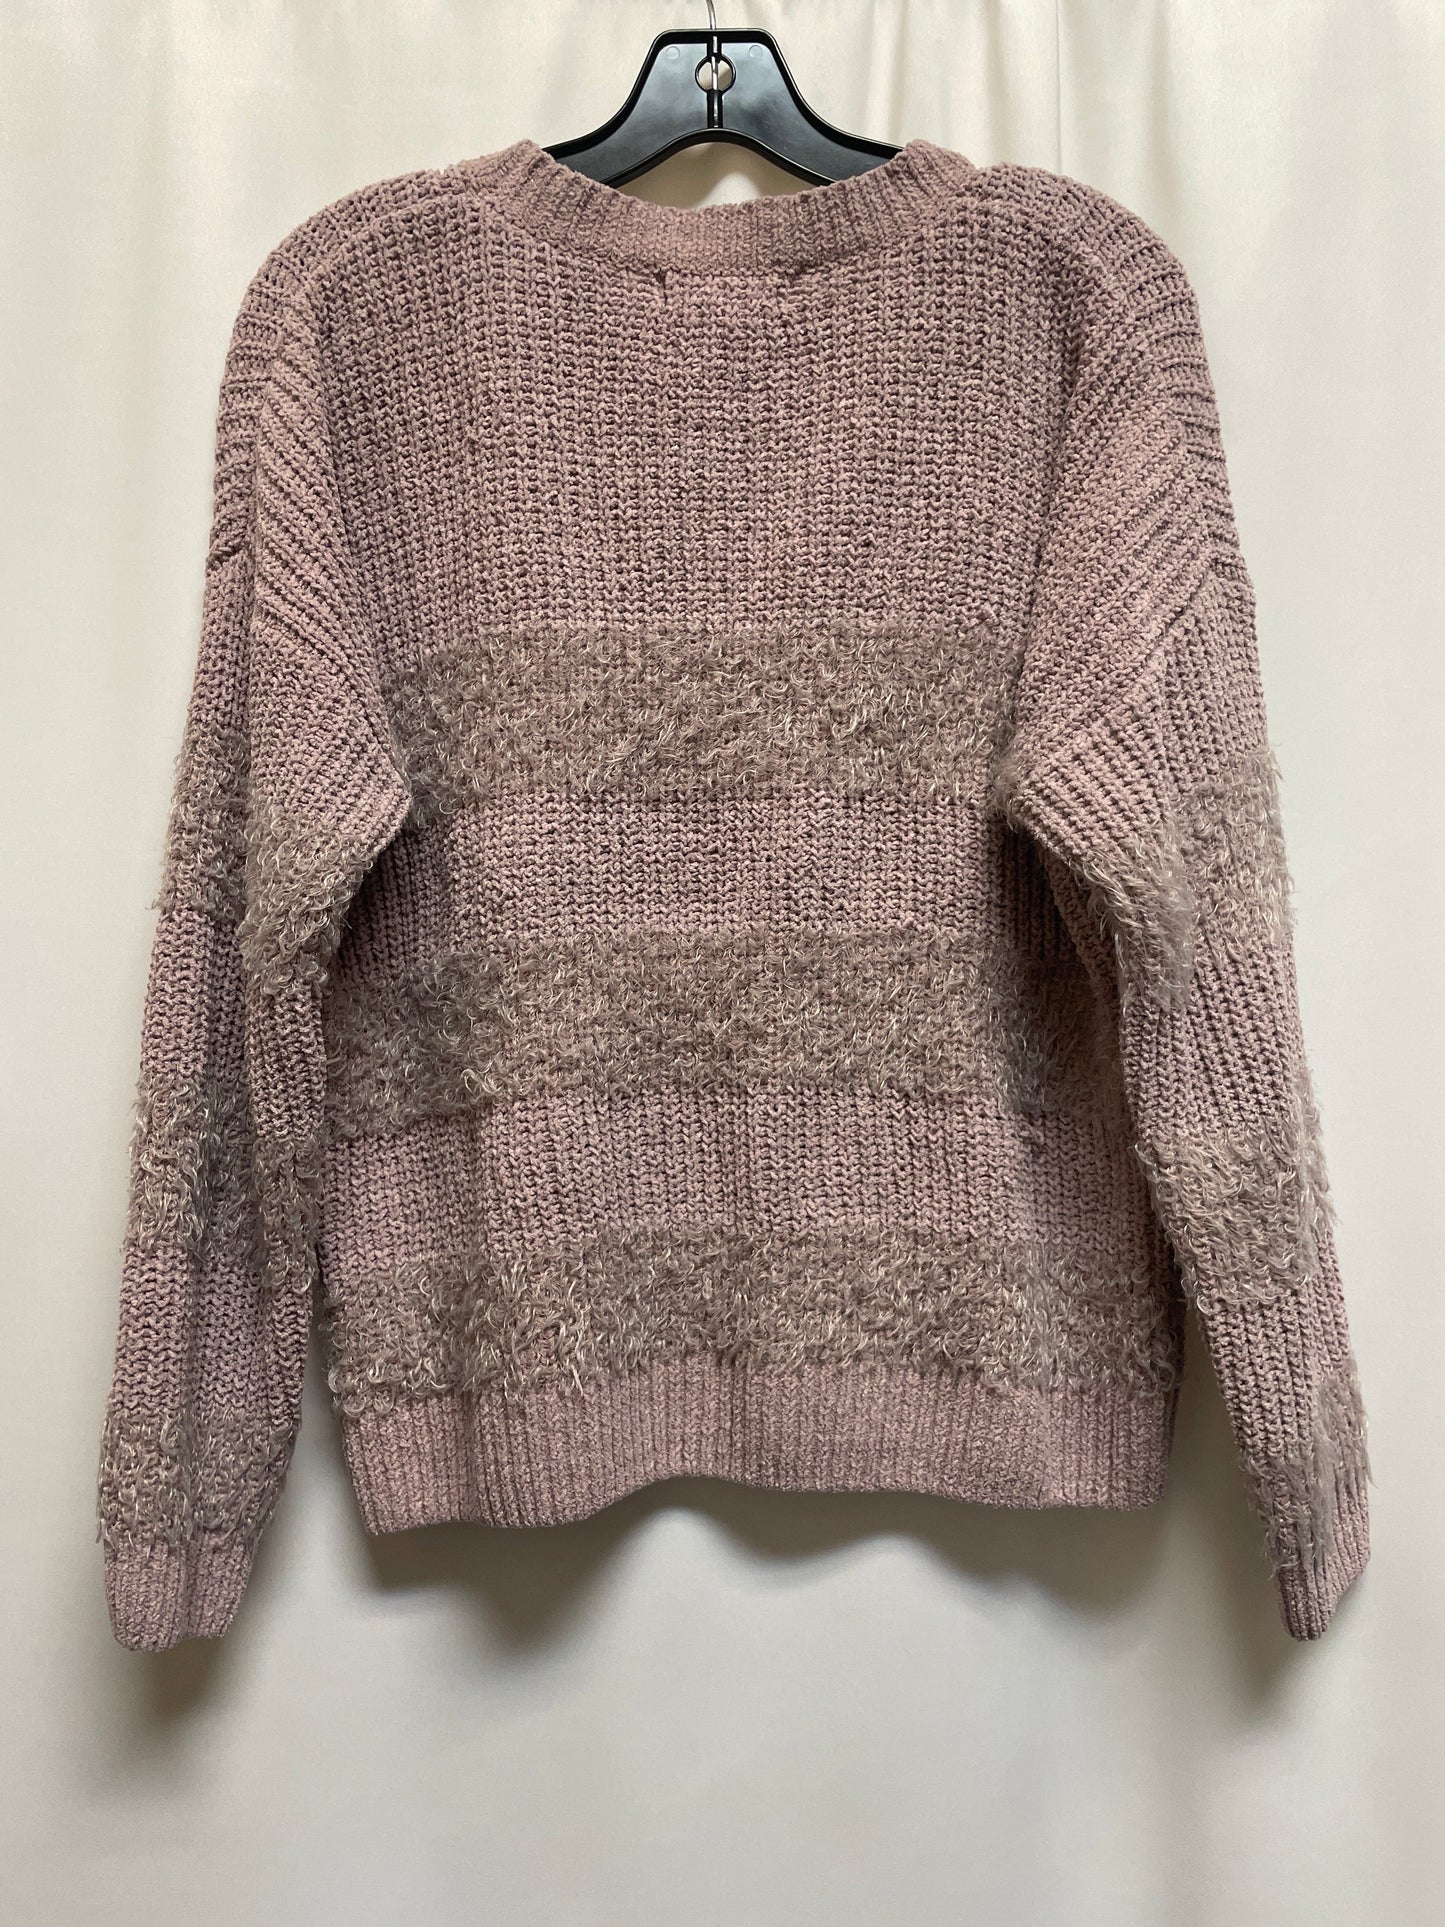 Sweater By Pink Rose  Size: L